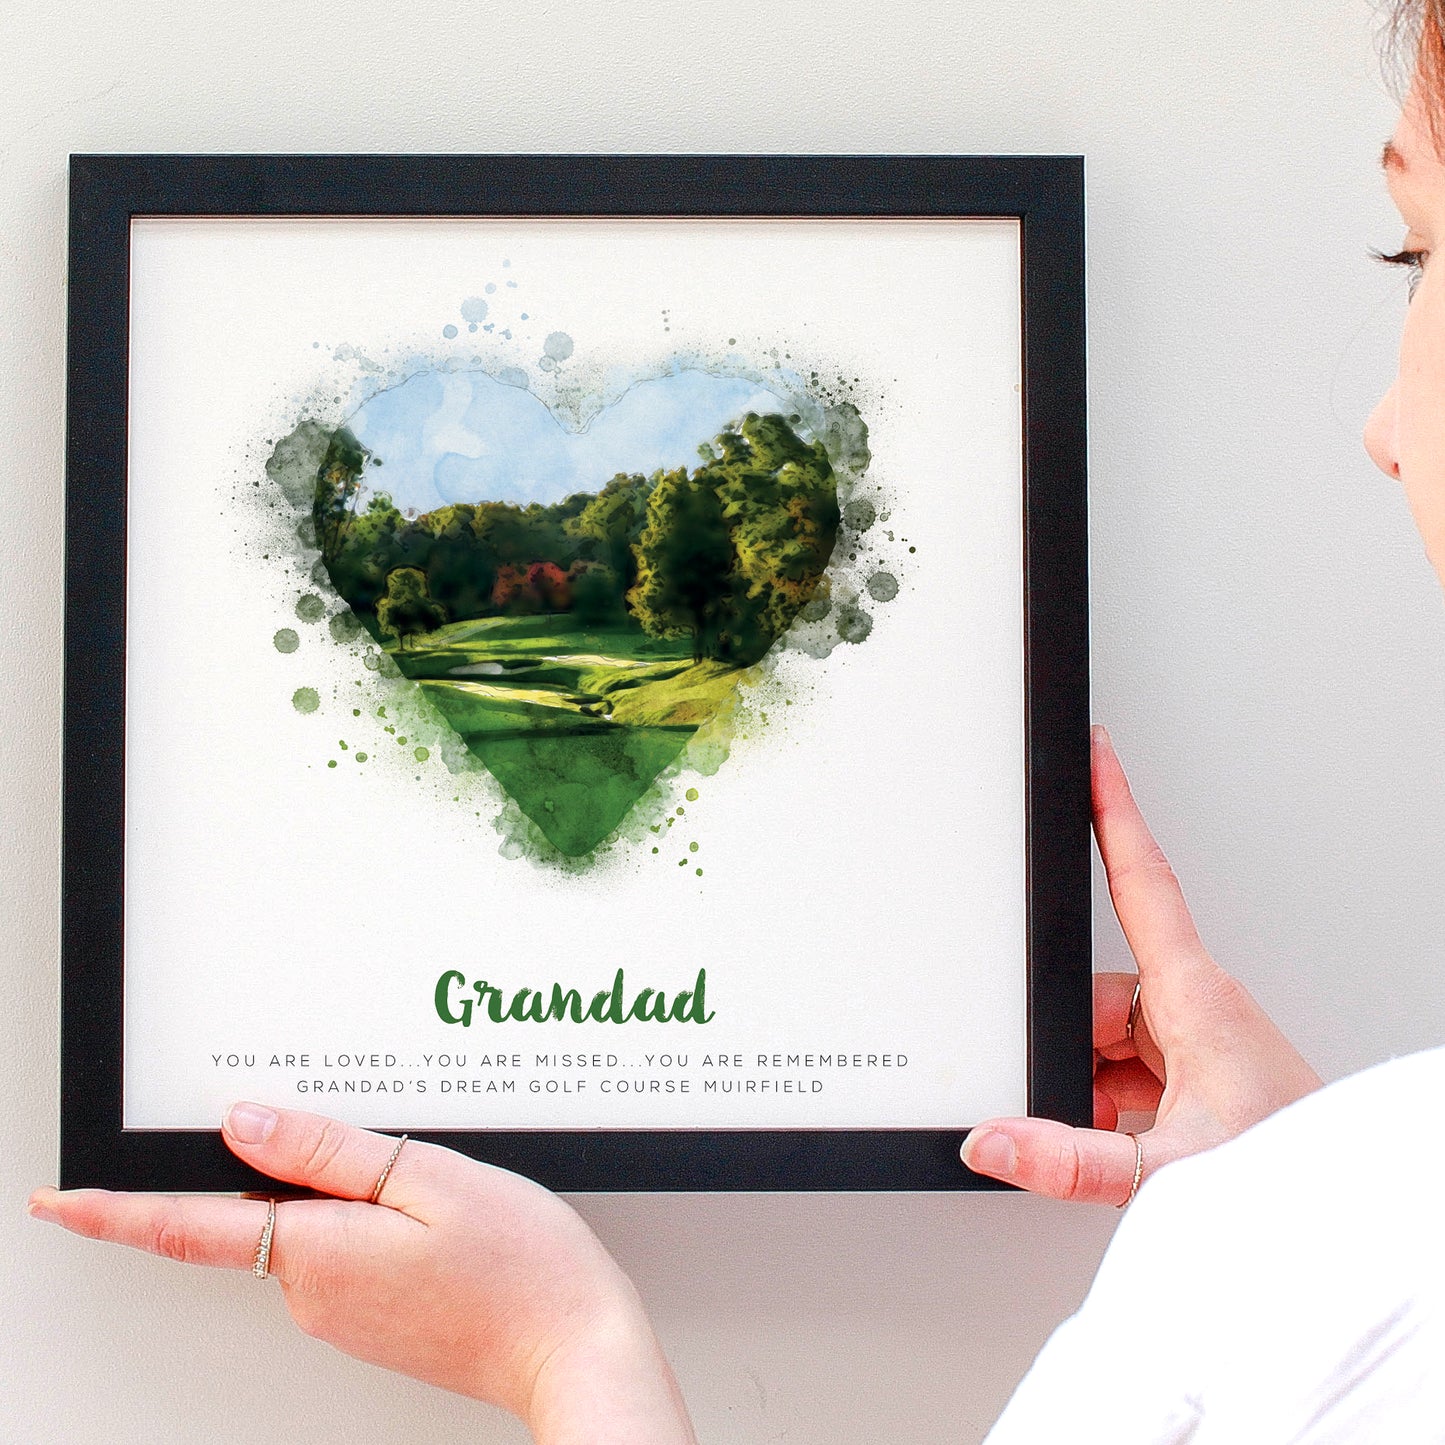 Muirfield Golf Course as an illustration for Grandad's favourite place in a black frame